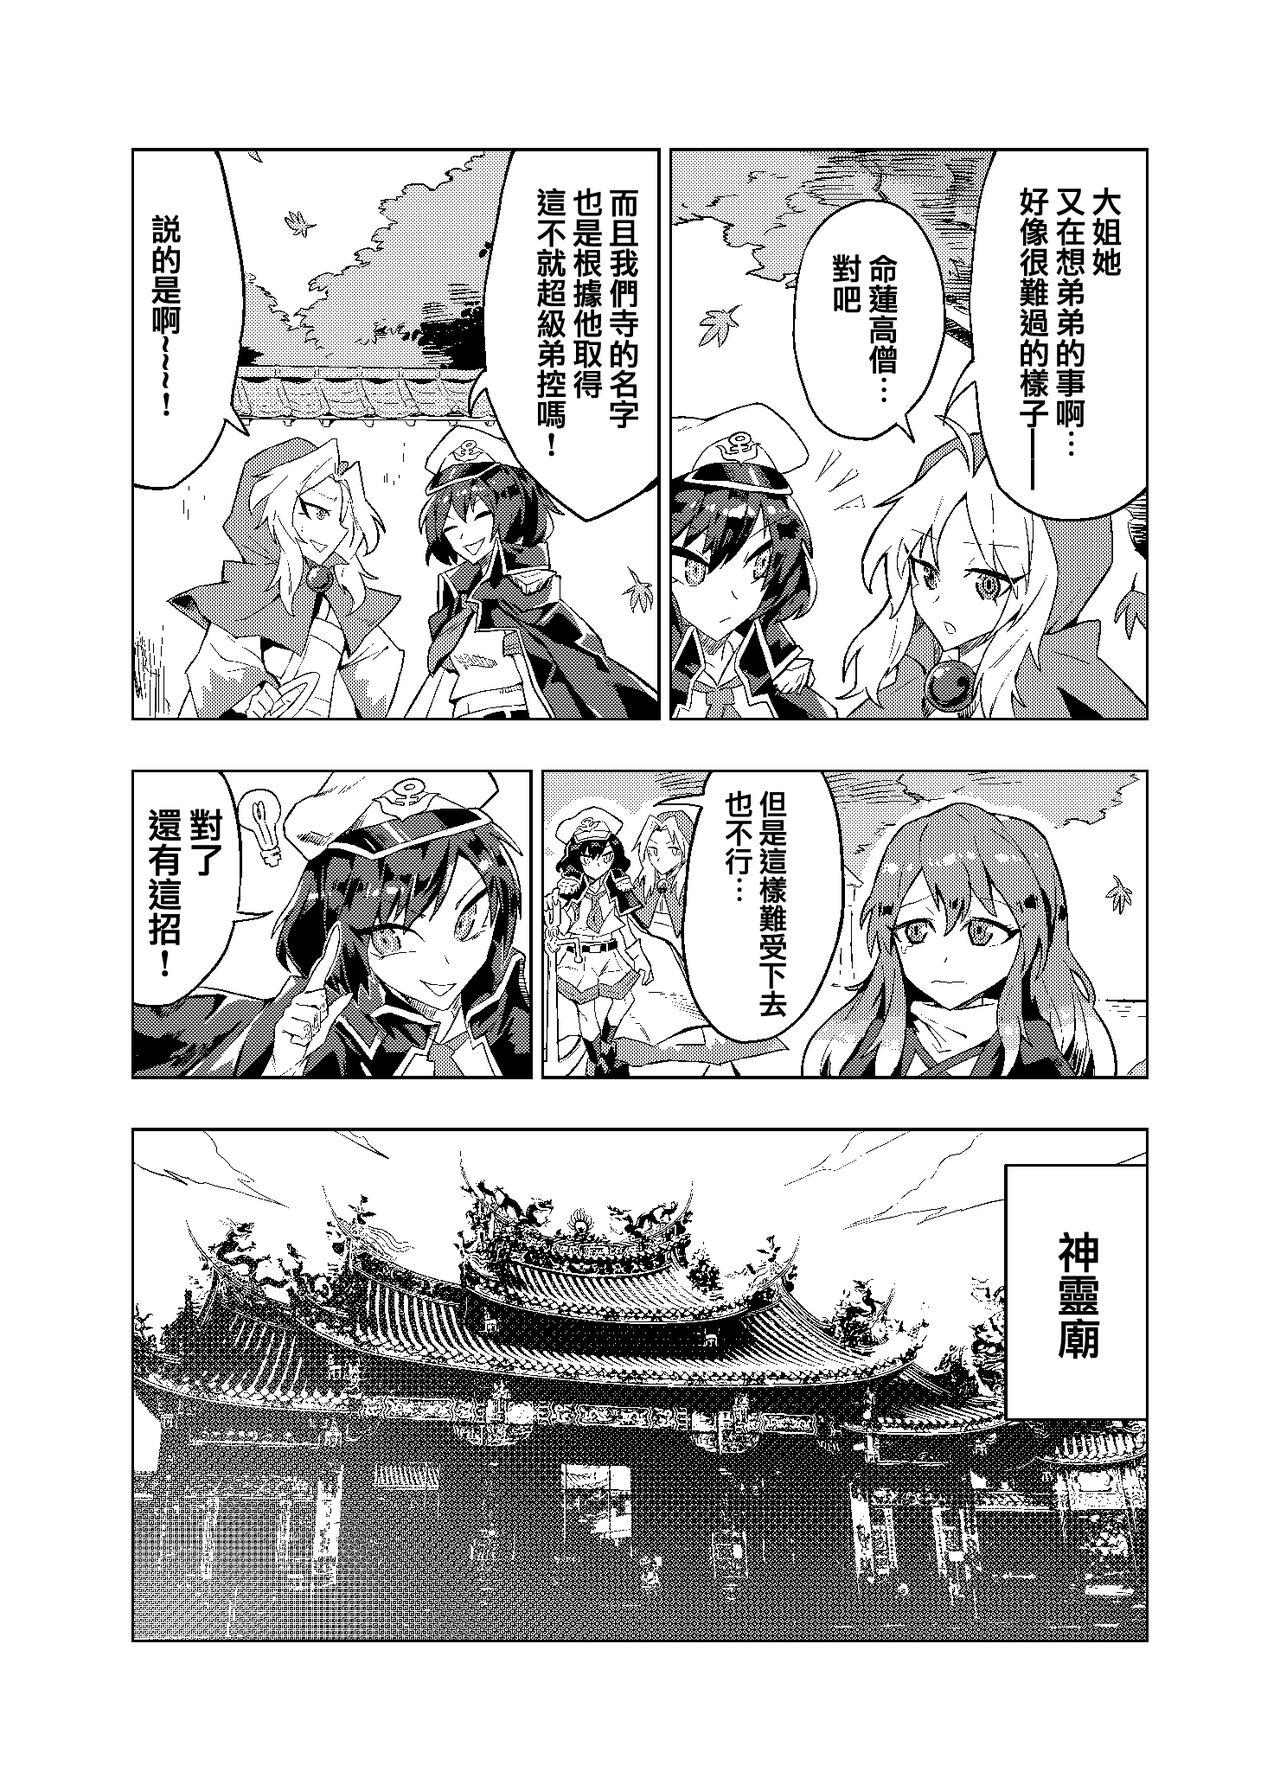 Amateur Porn 弟控圣和换装太子（Touhou Project） - Touhou project Athletic - Page 4